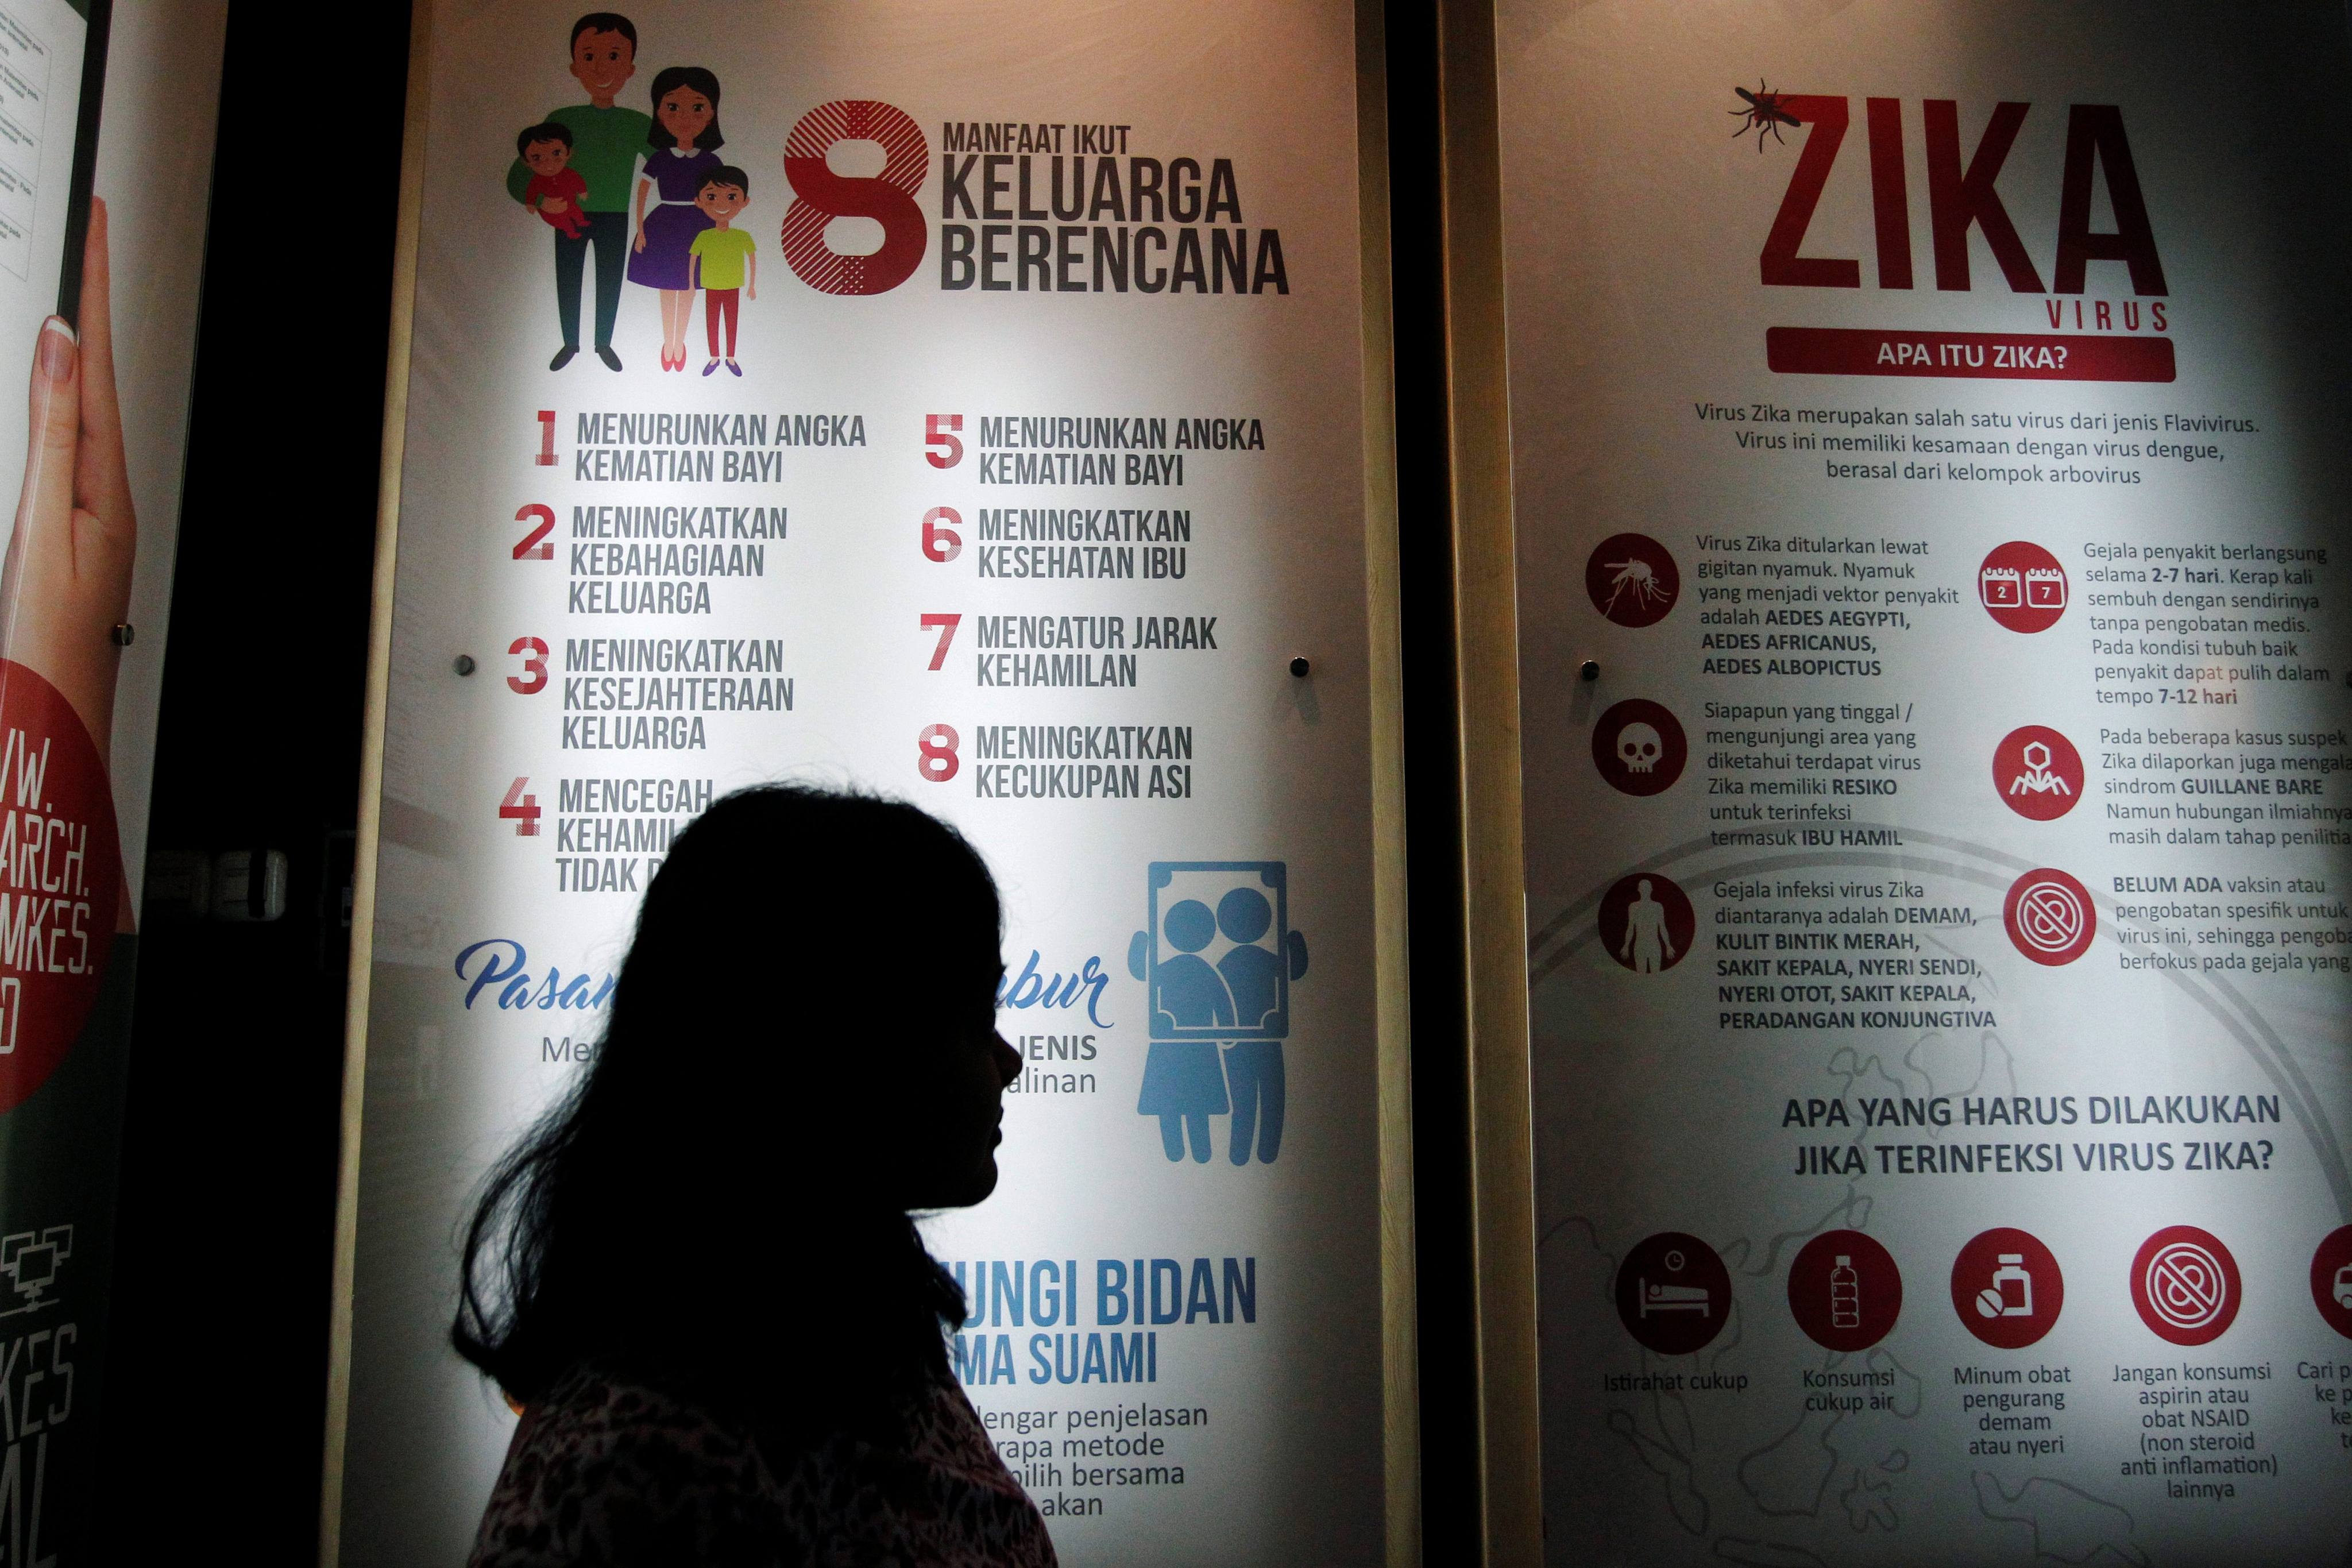 A woman stands near a poster about the Zika virus at the ministry of health office in Jakarta, Indonesia, in September 2016. Photo: Reuters